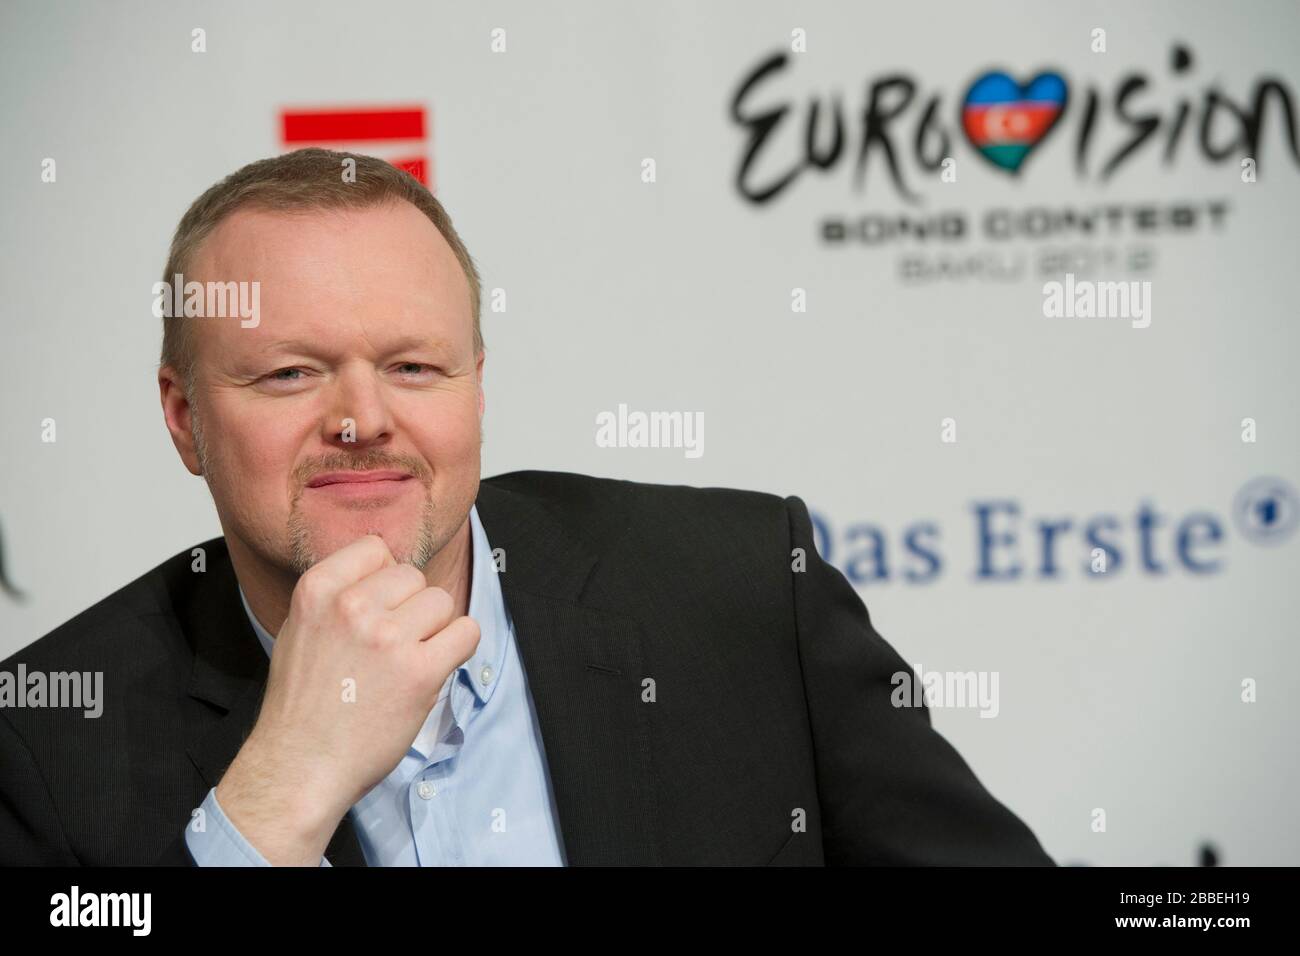 after Out for Eurovision Song Contest: Stefan RAAB puts replacement show on TV. Archive photo: Stefan Raab, TV presenter and jury member, portrait, portrait, single image, cut single motif, press conference, press conference, finale of 'Our star for Baku' for the Eurovision Song Contest 2012 in Baku/Azerbaijan, Das Erste/ARD, recorded in KÌ ln, February 16, 2012. å | usage worldwide Stock Photo